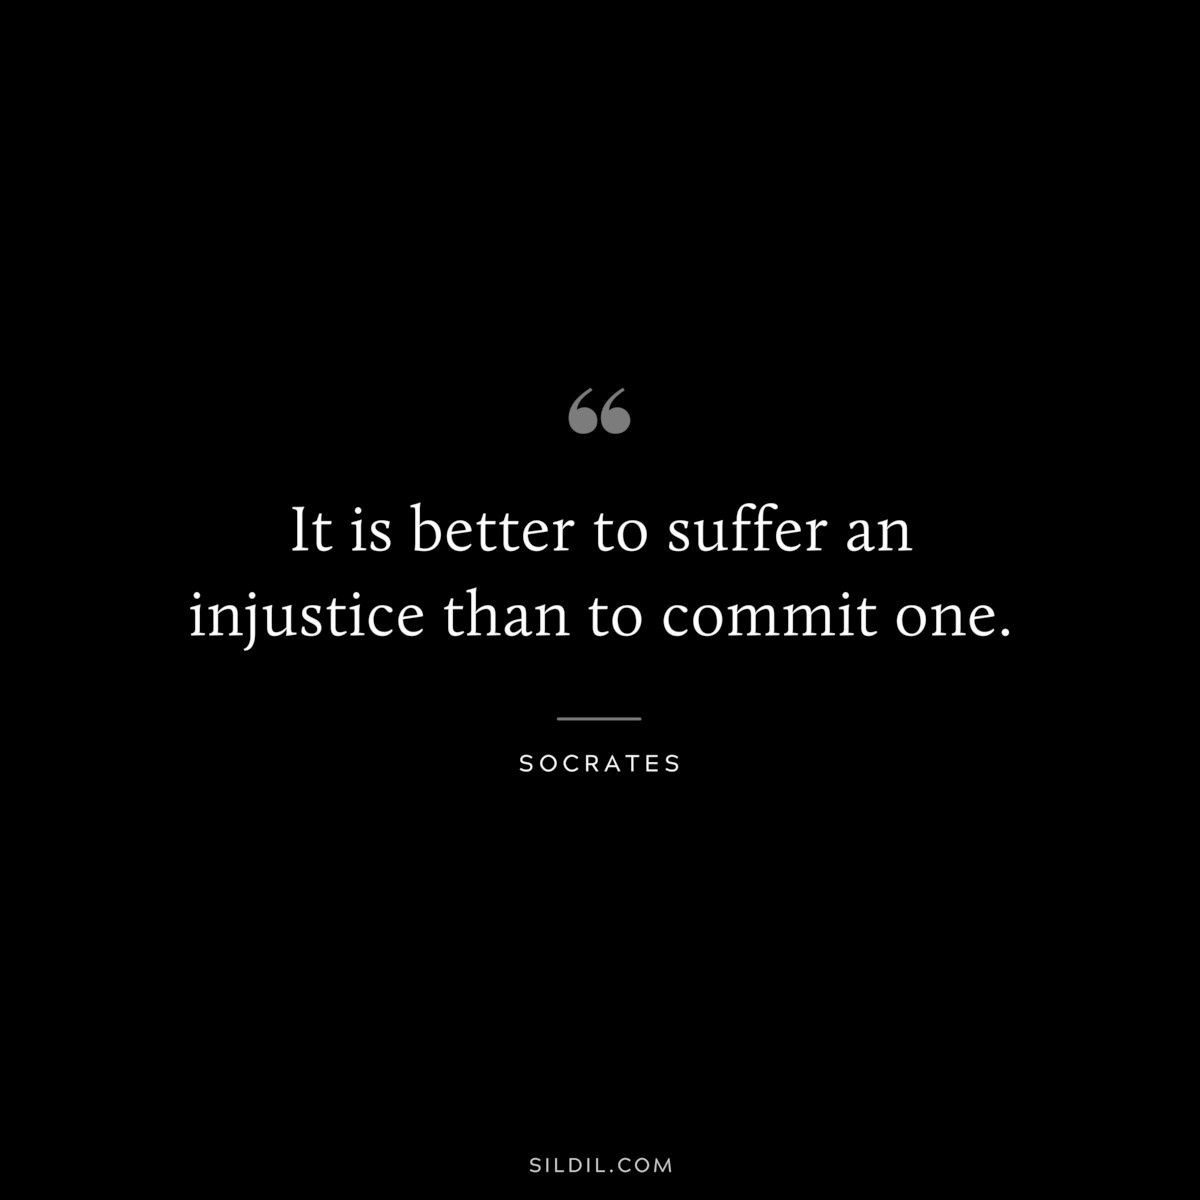 It is better to suffer an injustice than to commit one. ― Socrates